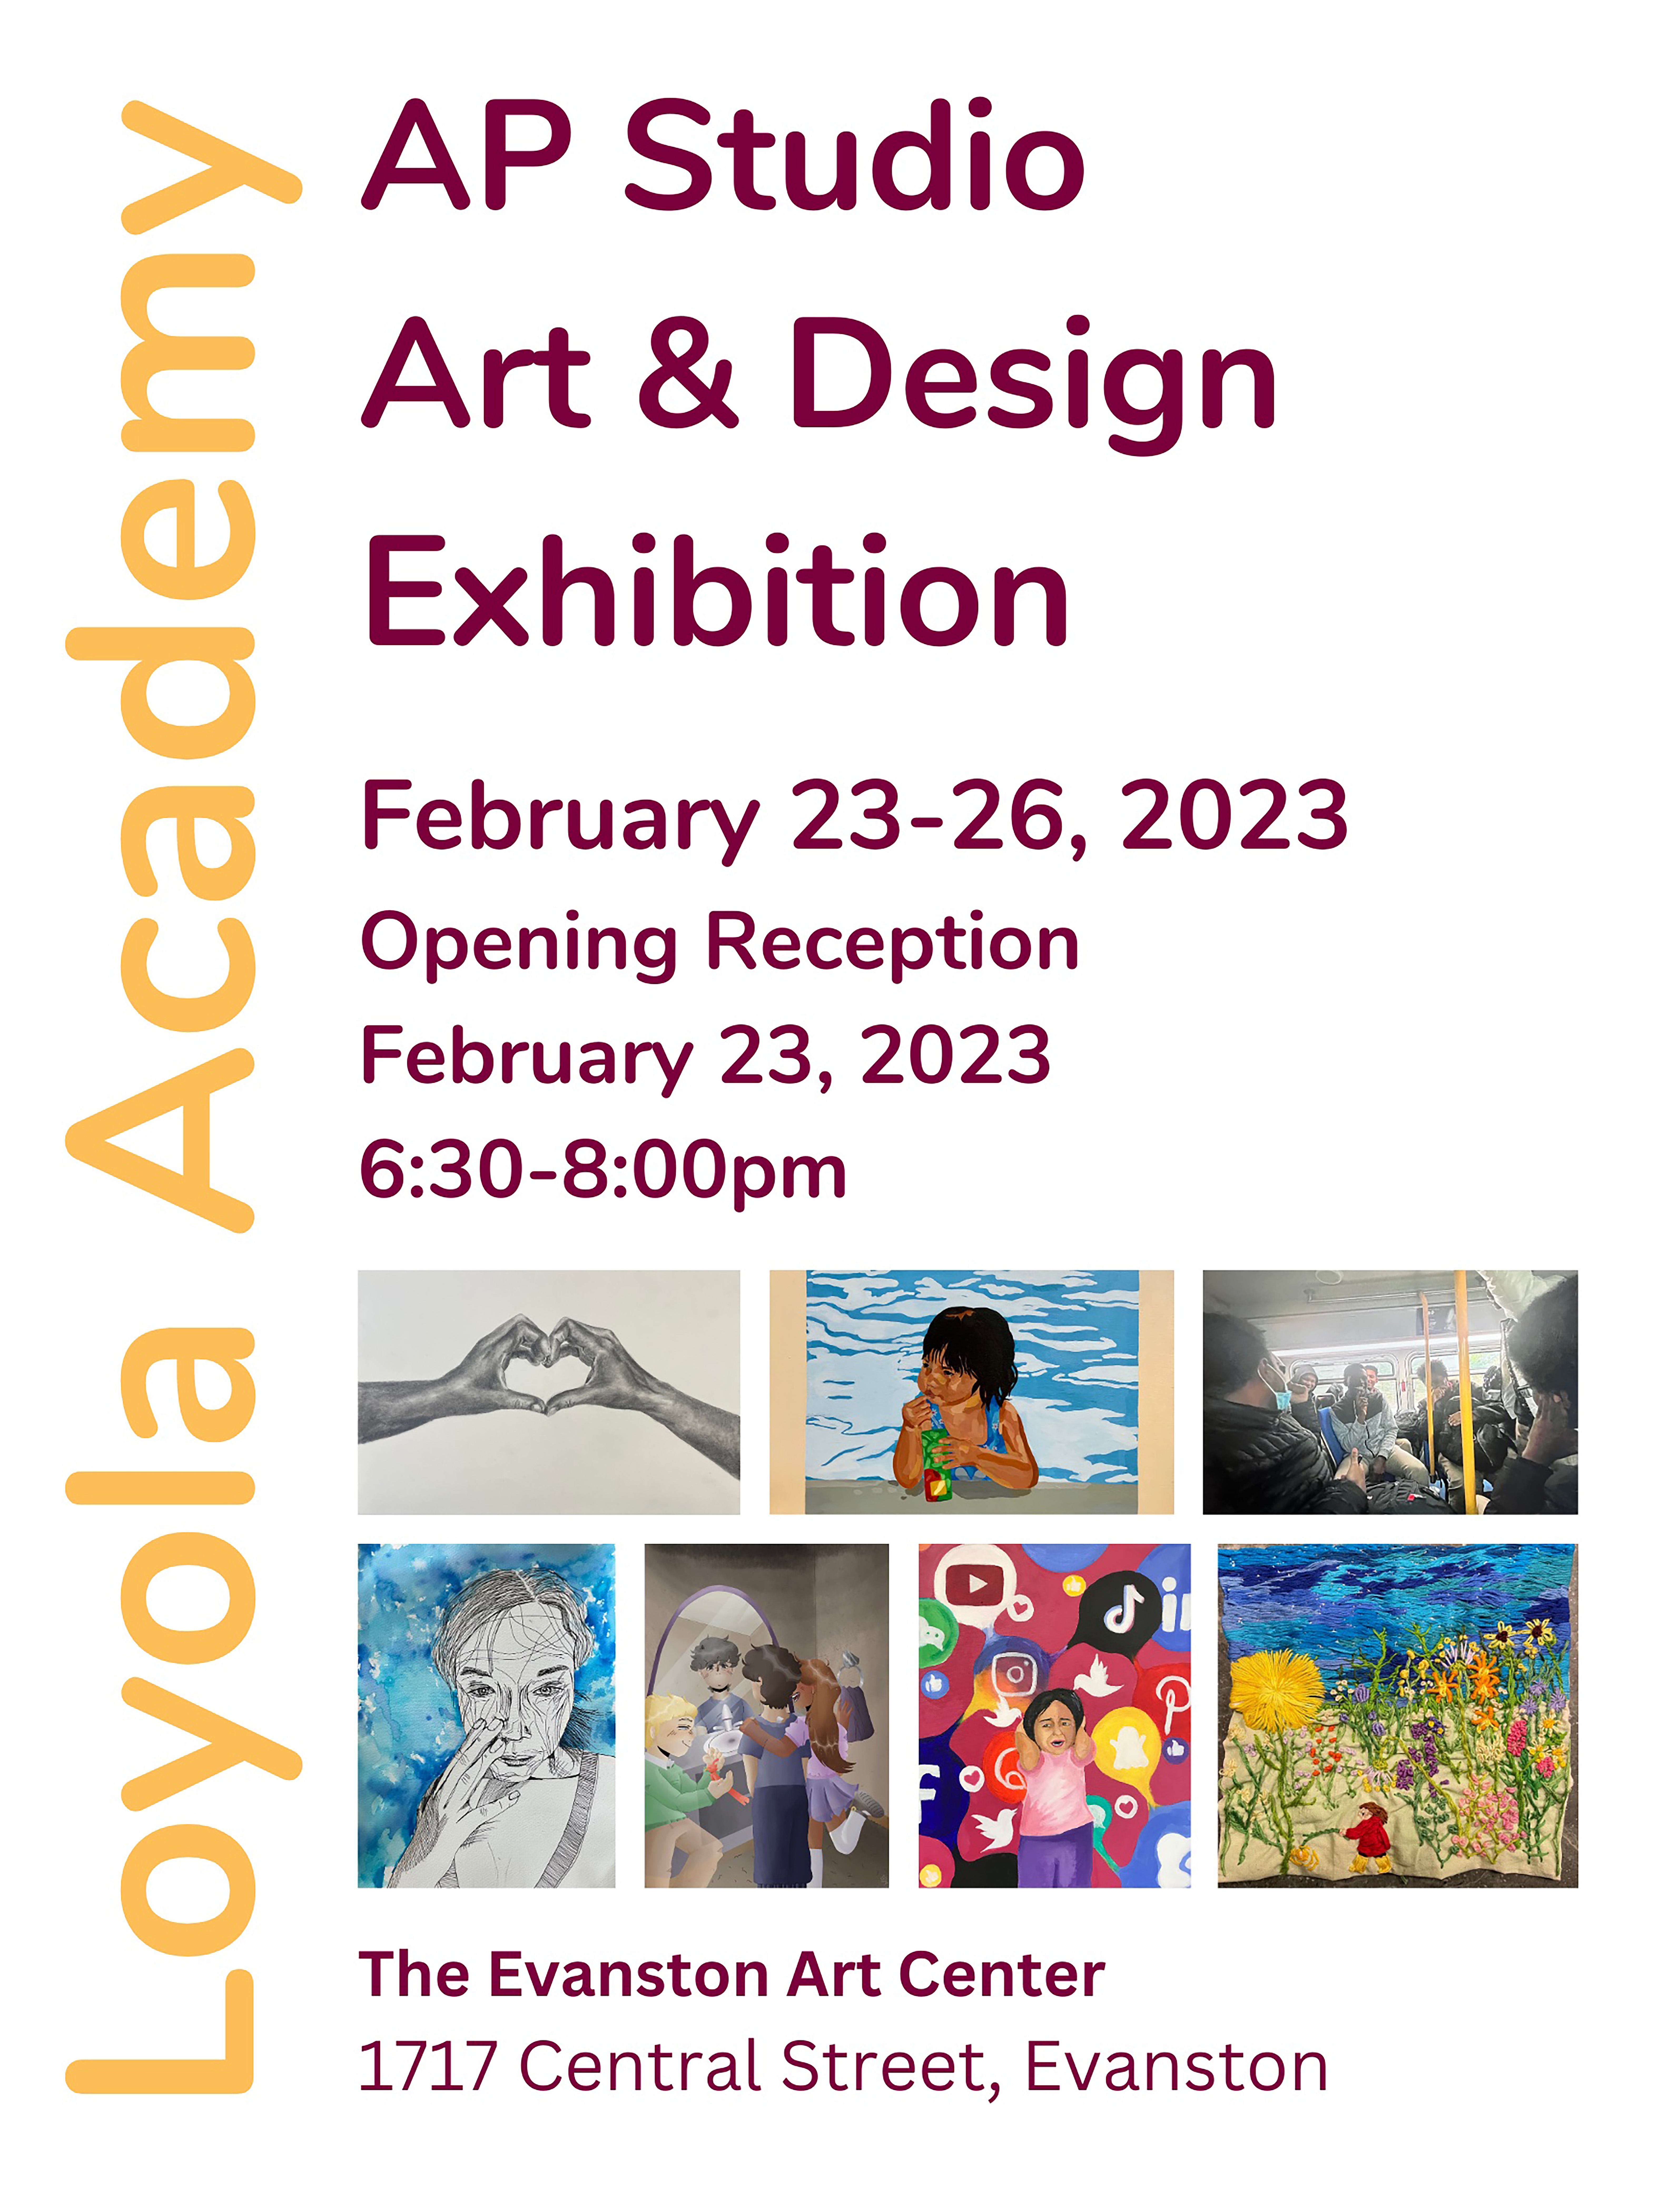 Flyer for Loyola Academy AP Studio Art Design Exhibition, featuring images of student work